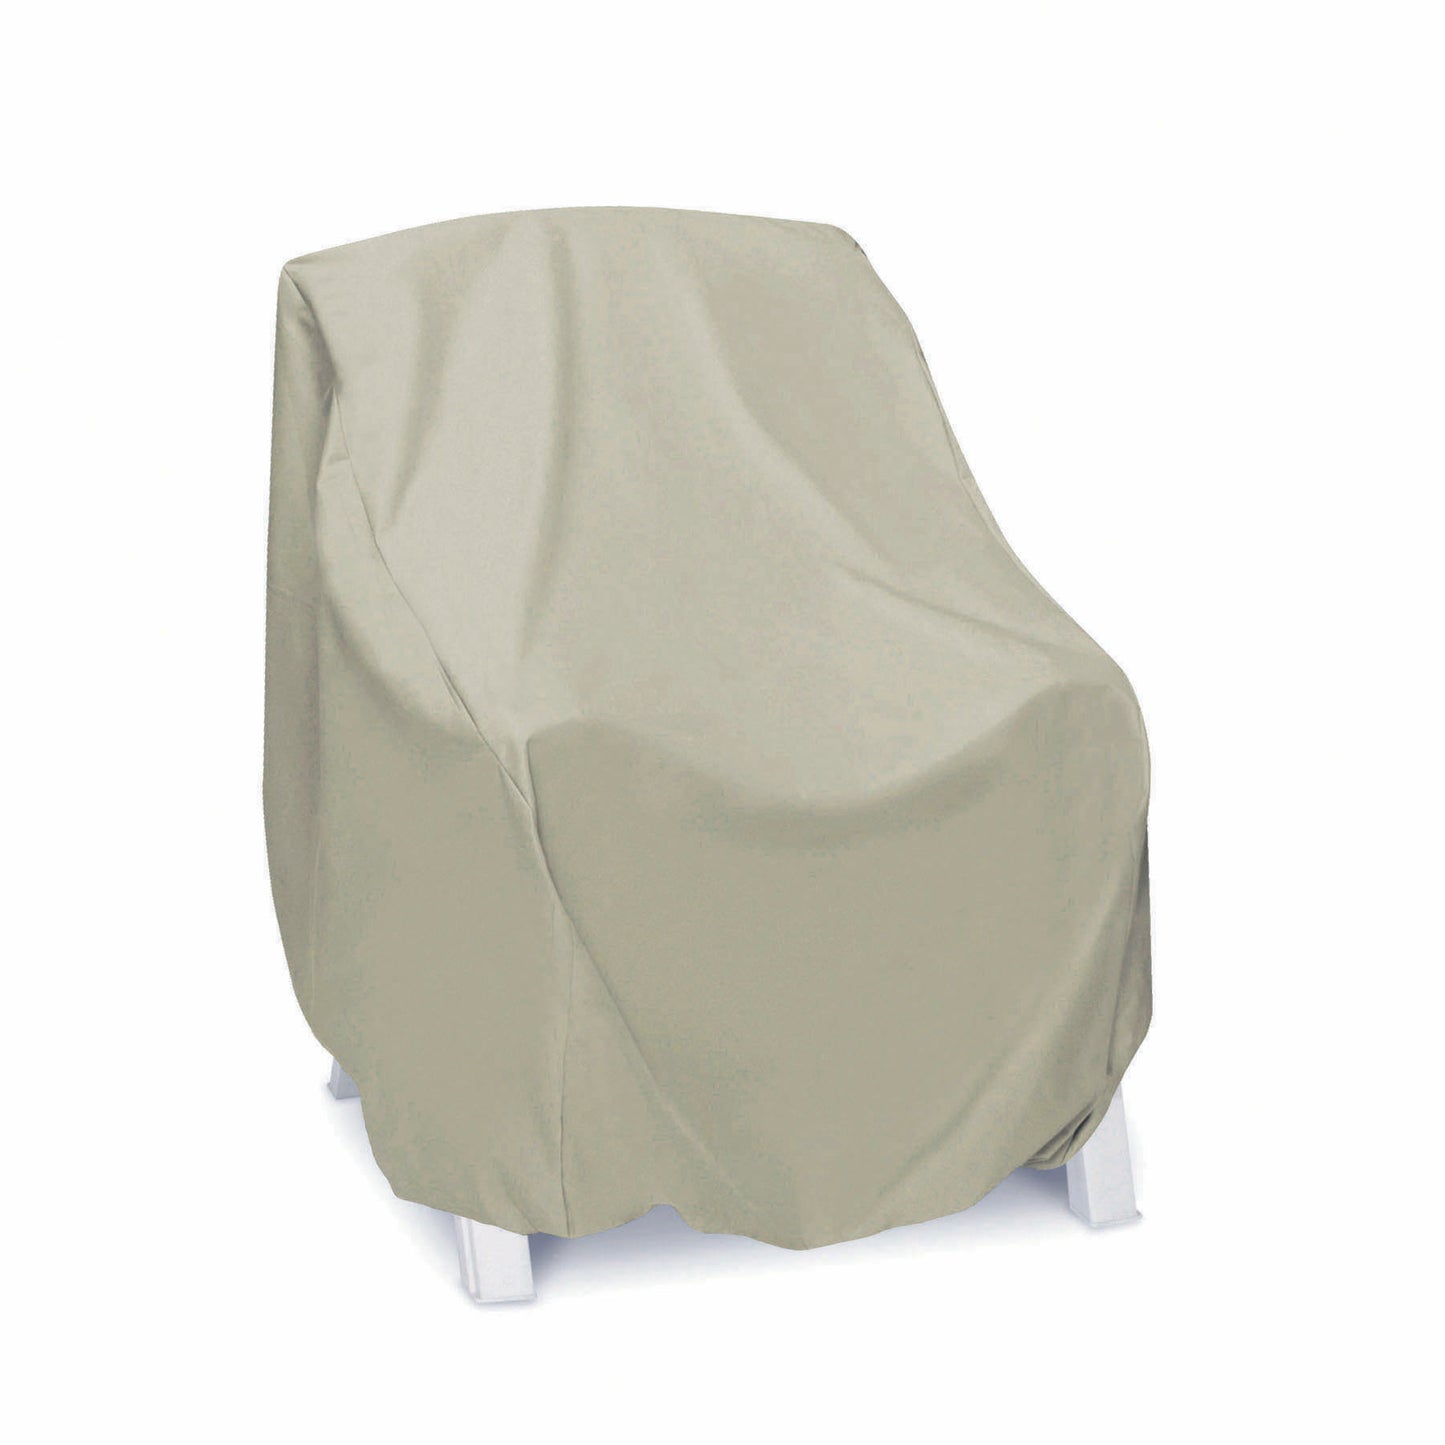 Two Dogs Designs High Back Chair Cover (Khaki)